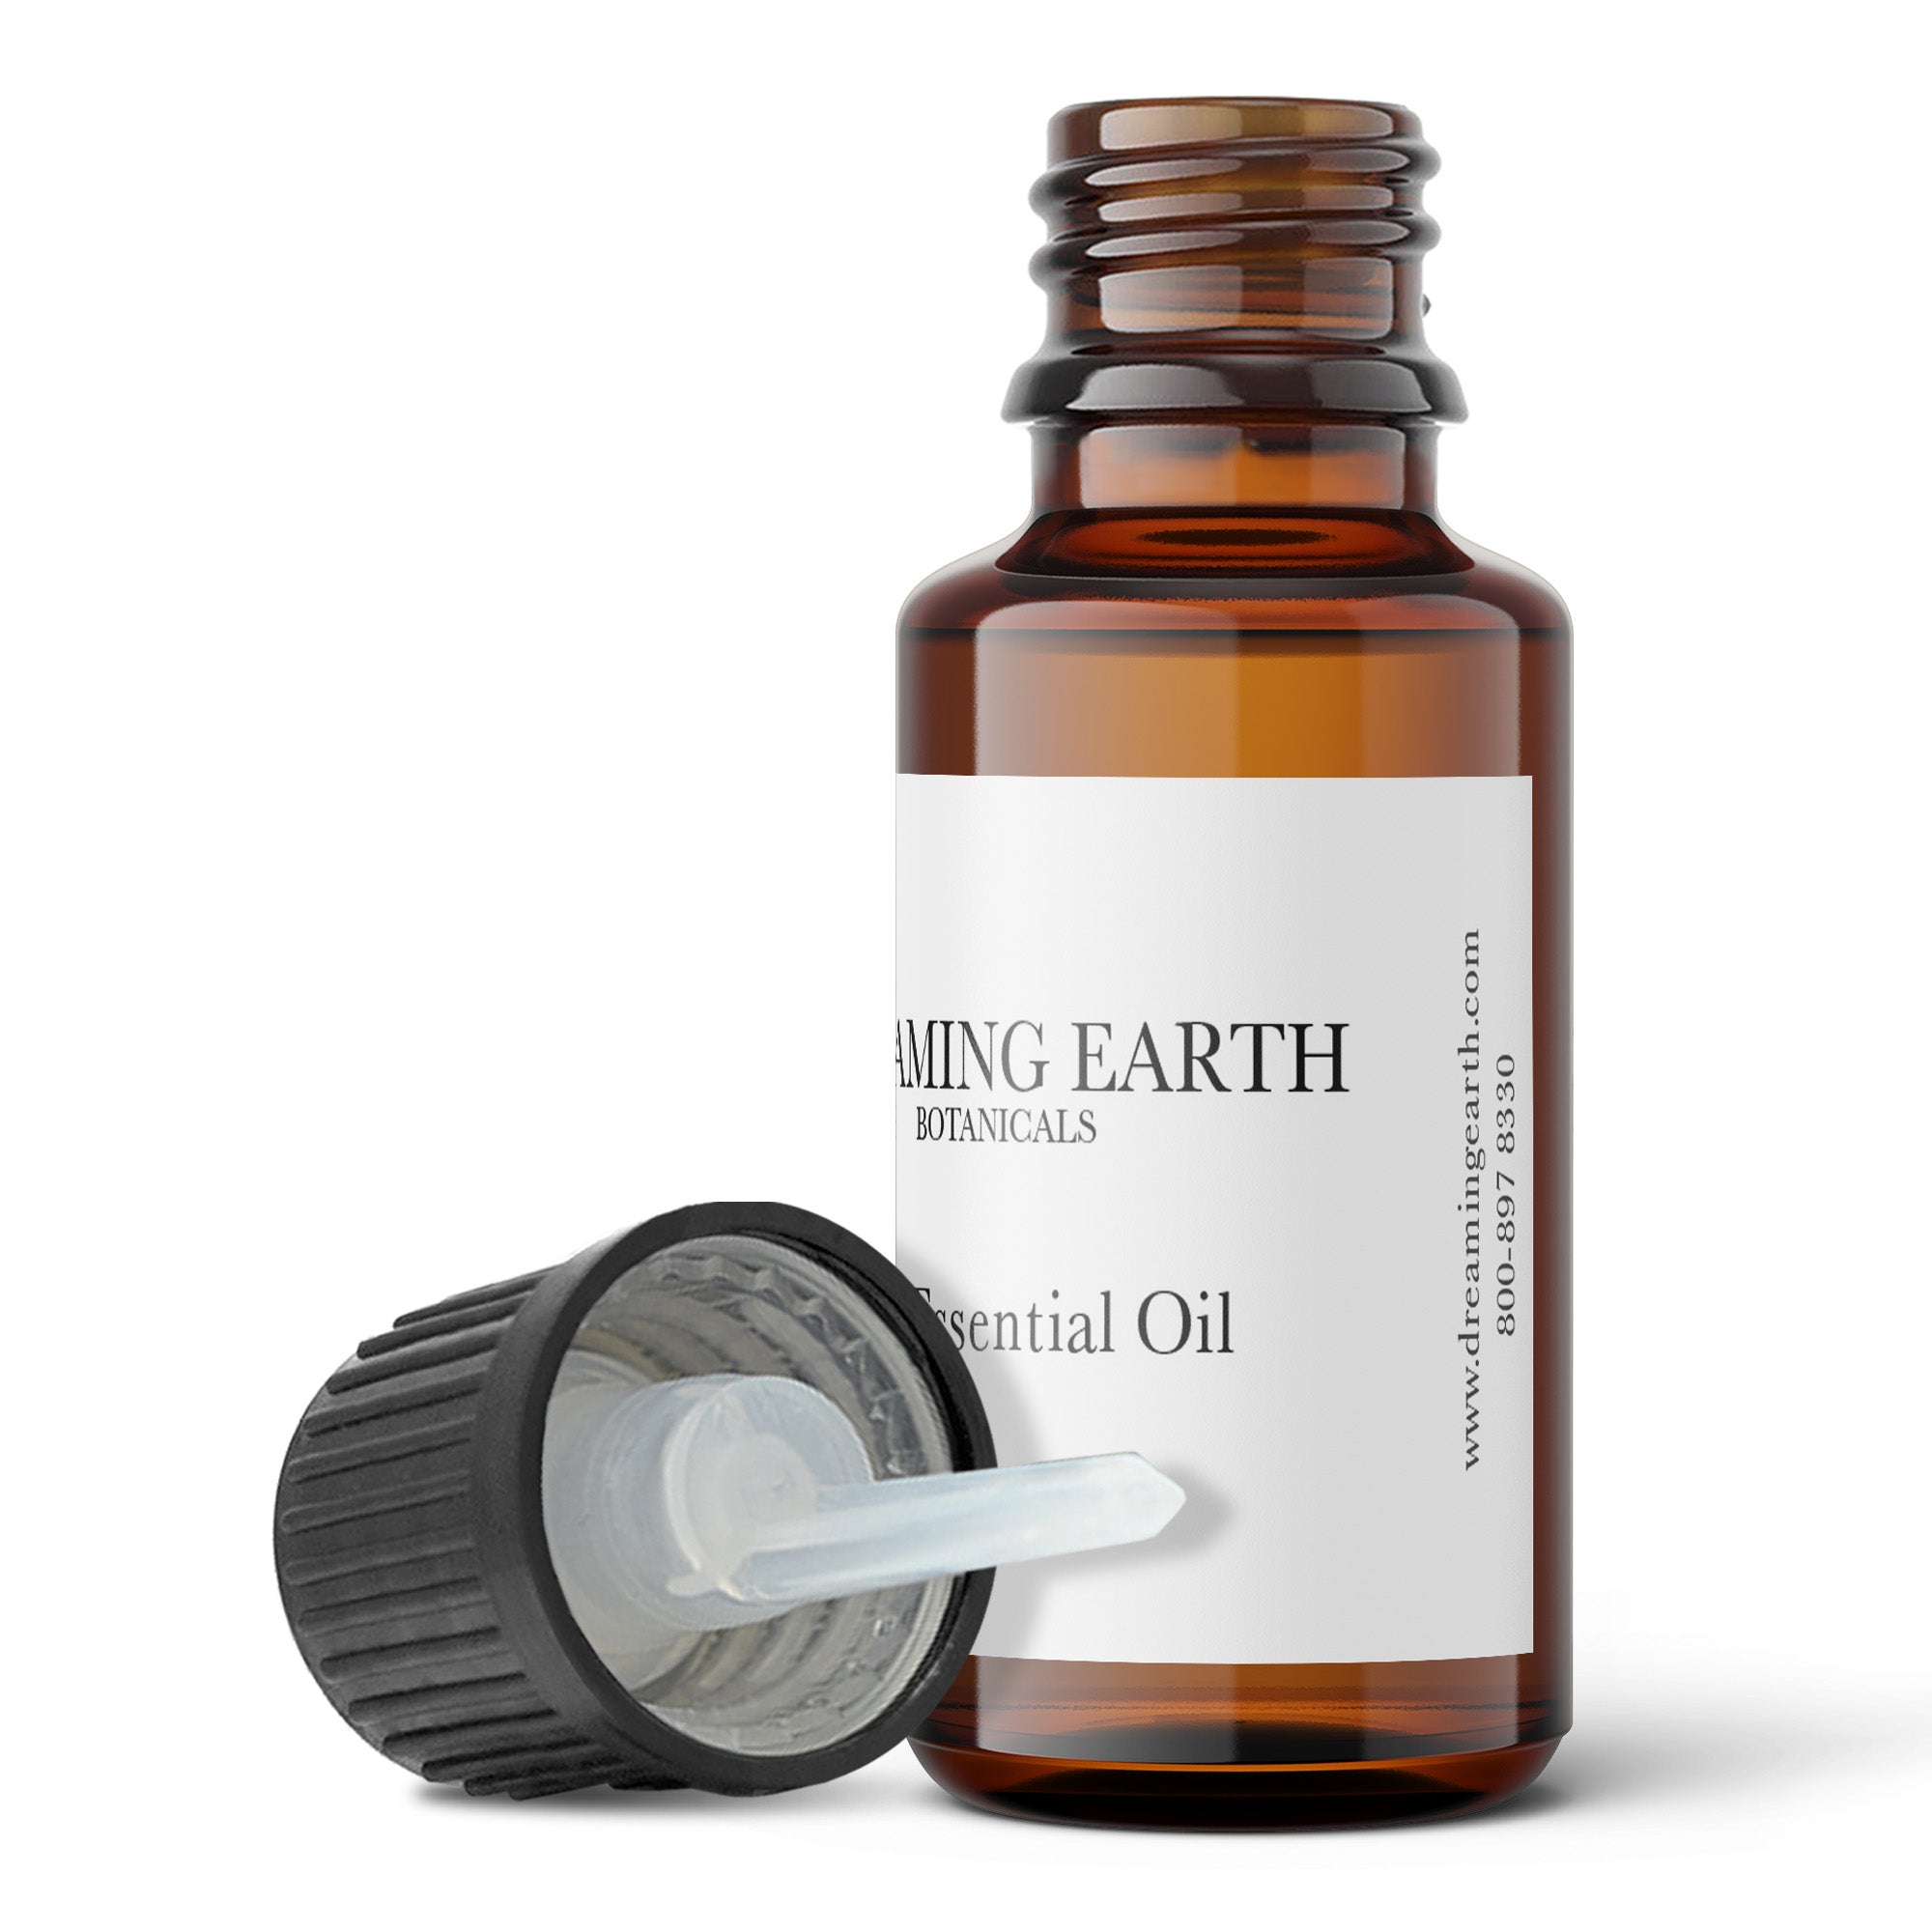 Load image into Gallery viewer, Ginger, Fresh Essential Oil, Organic - Dreaming Earth Inc
